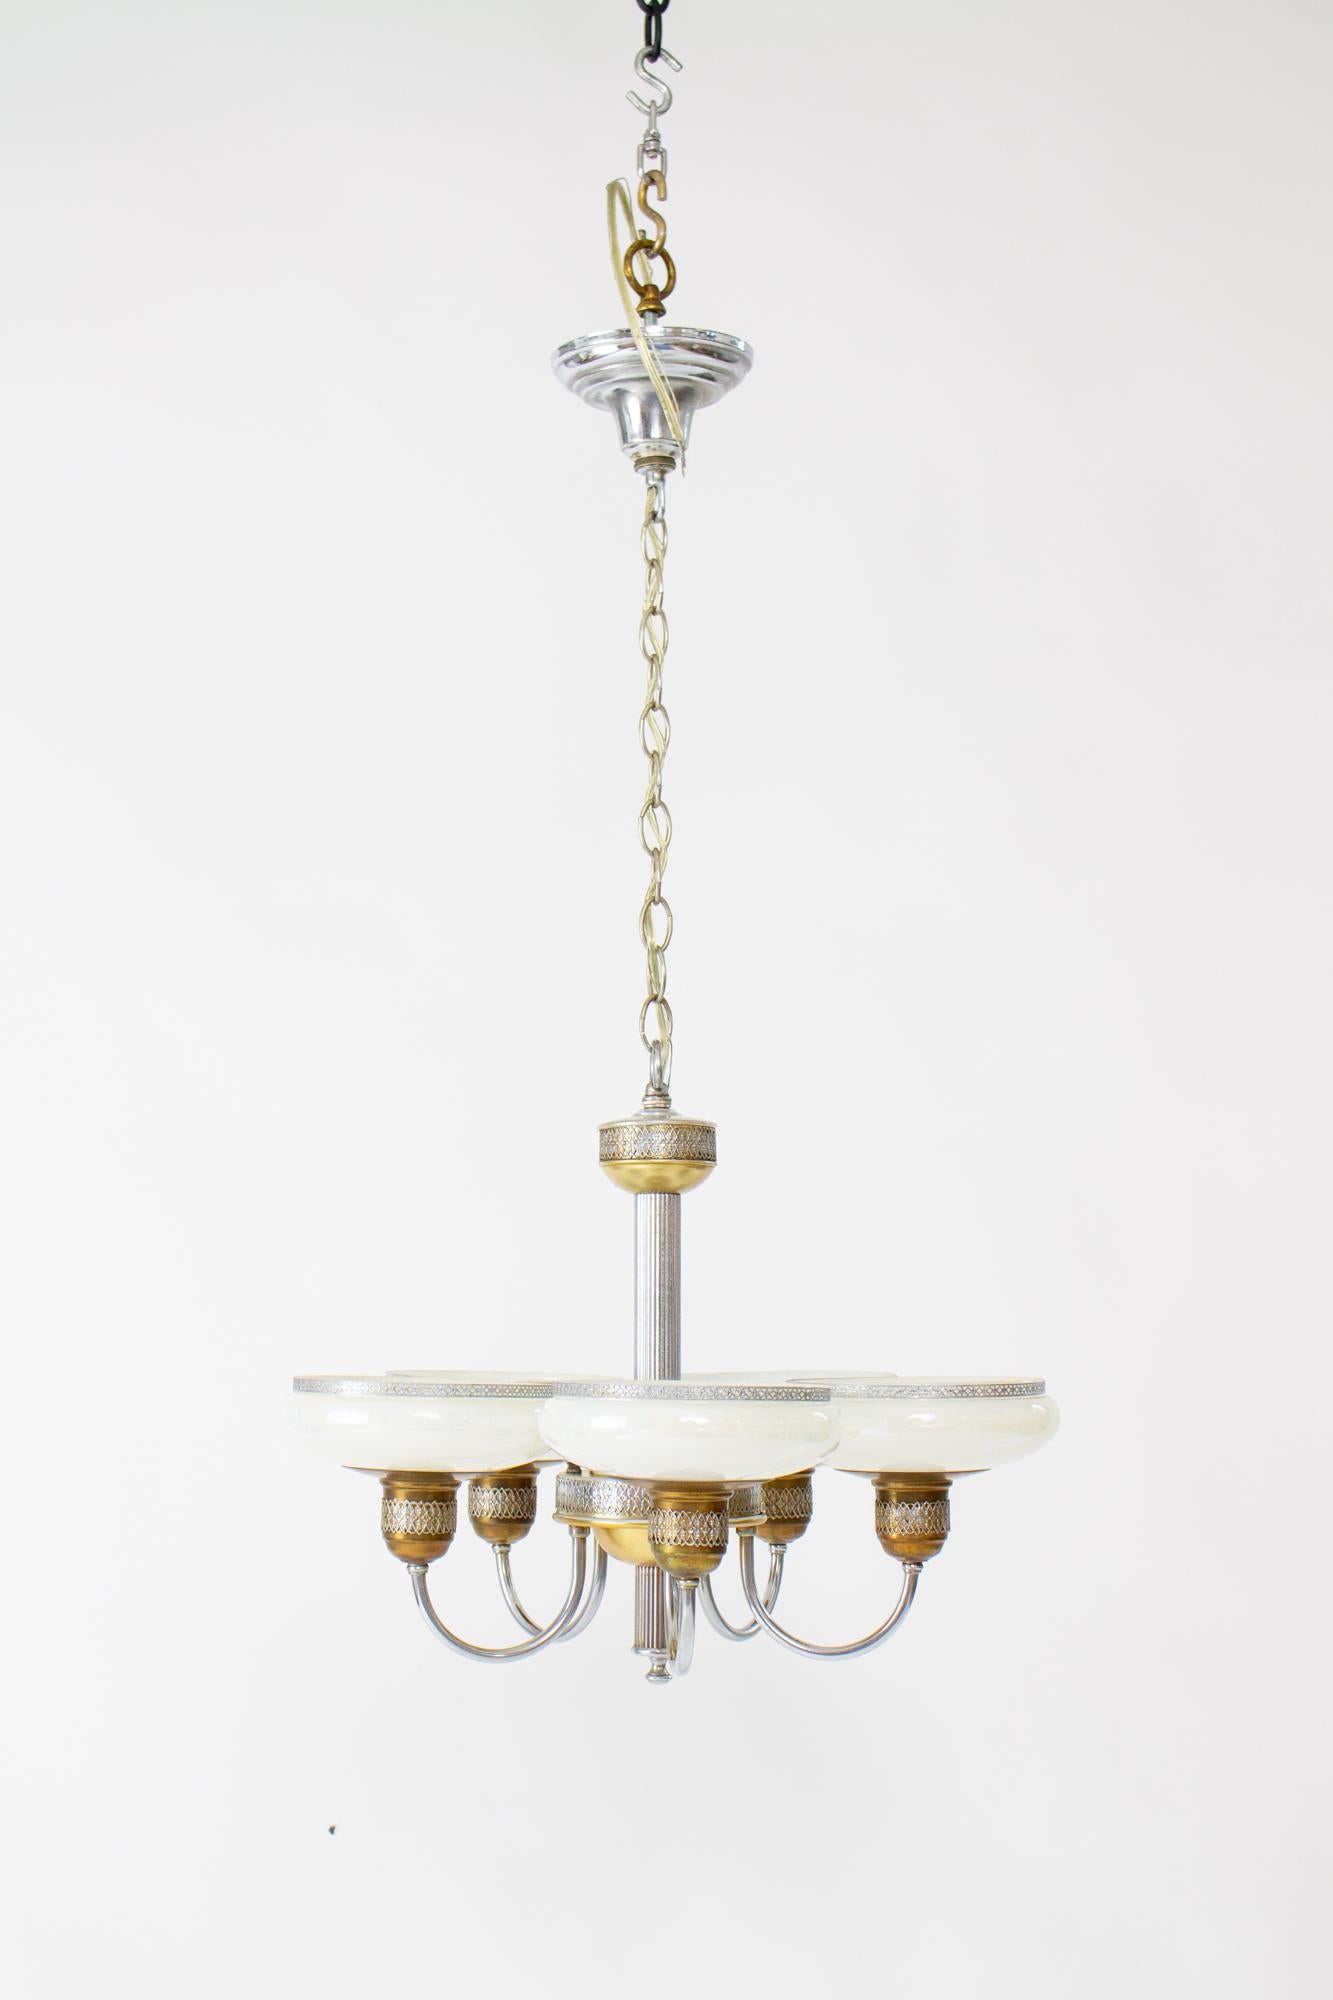 1930’s Art Deco chandelier with iridescent glass and a mixed metal look. The chandelier has a ribbed central stem and five arms that curve up to hold saucer shaped iridescent glass shades. It is designed with a two toned chrome and brass look, and